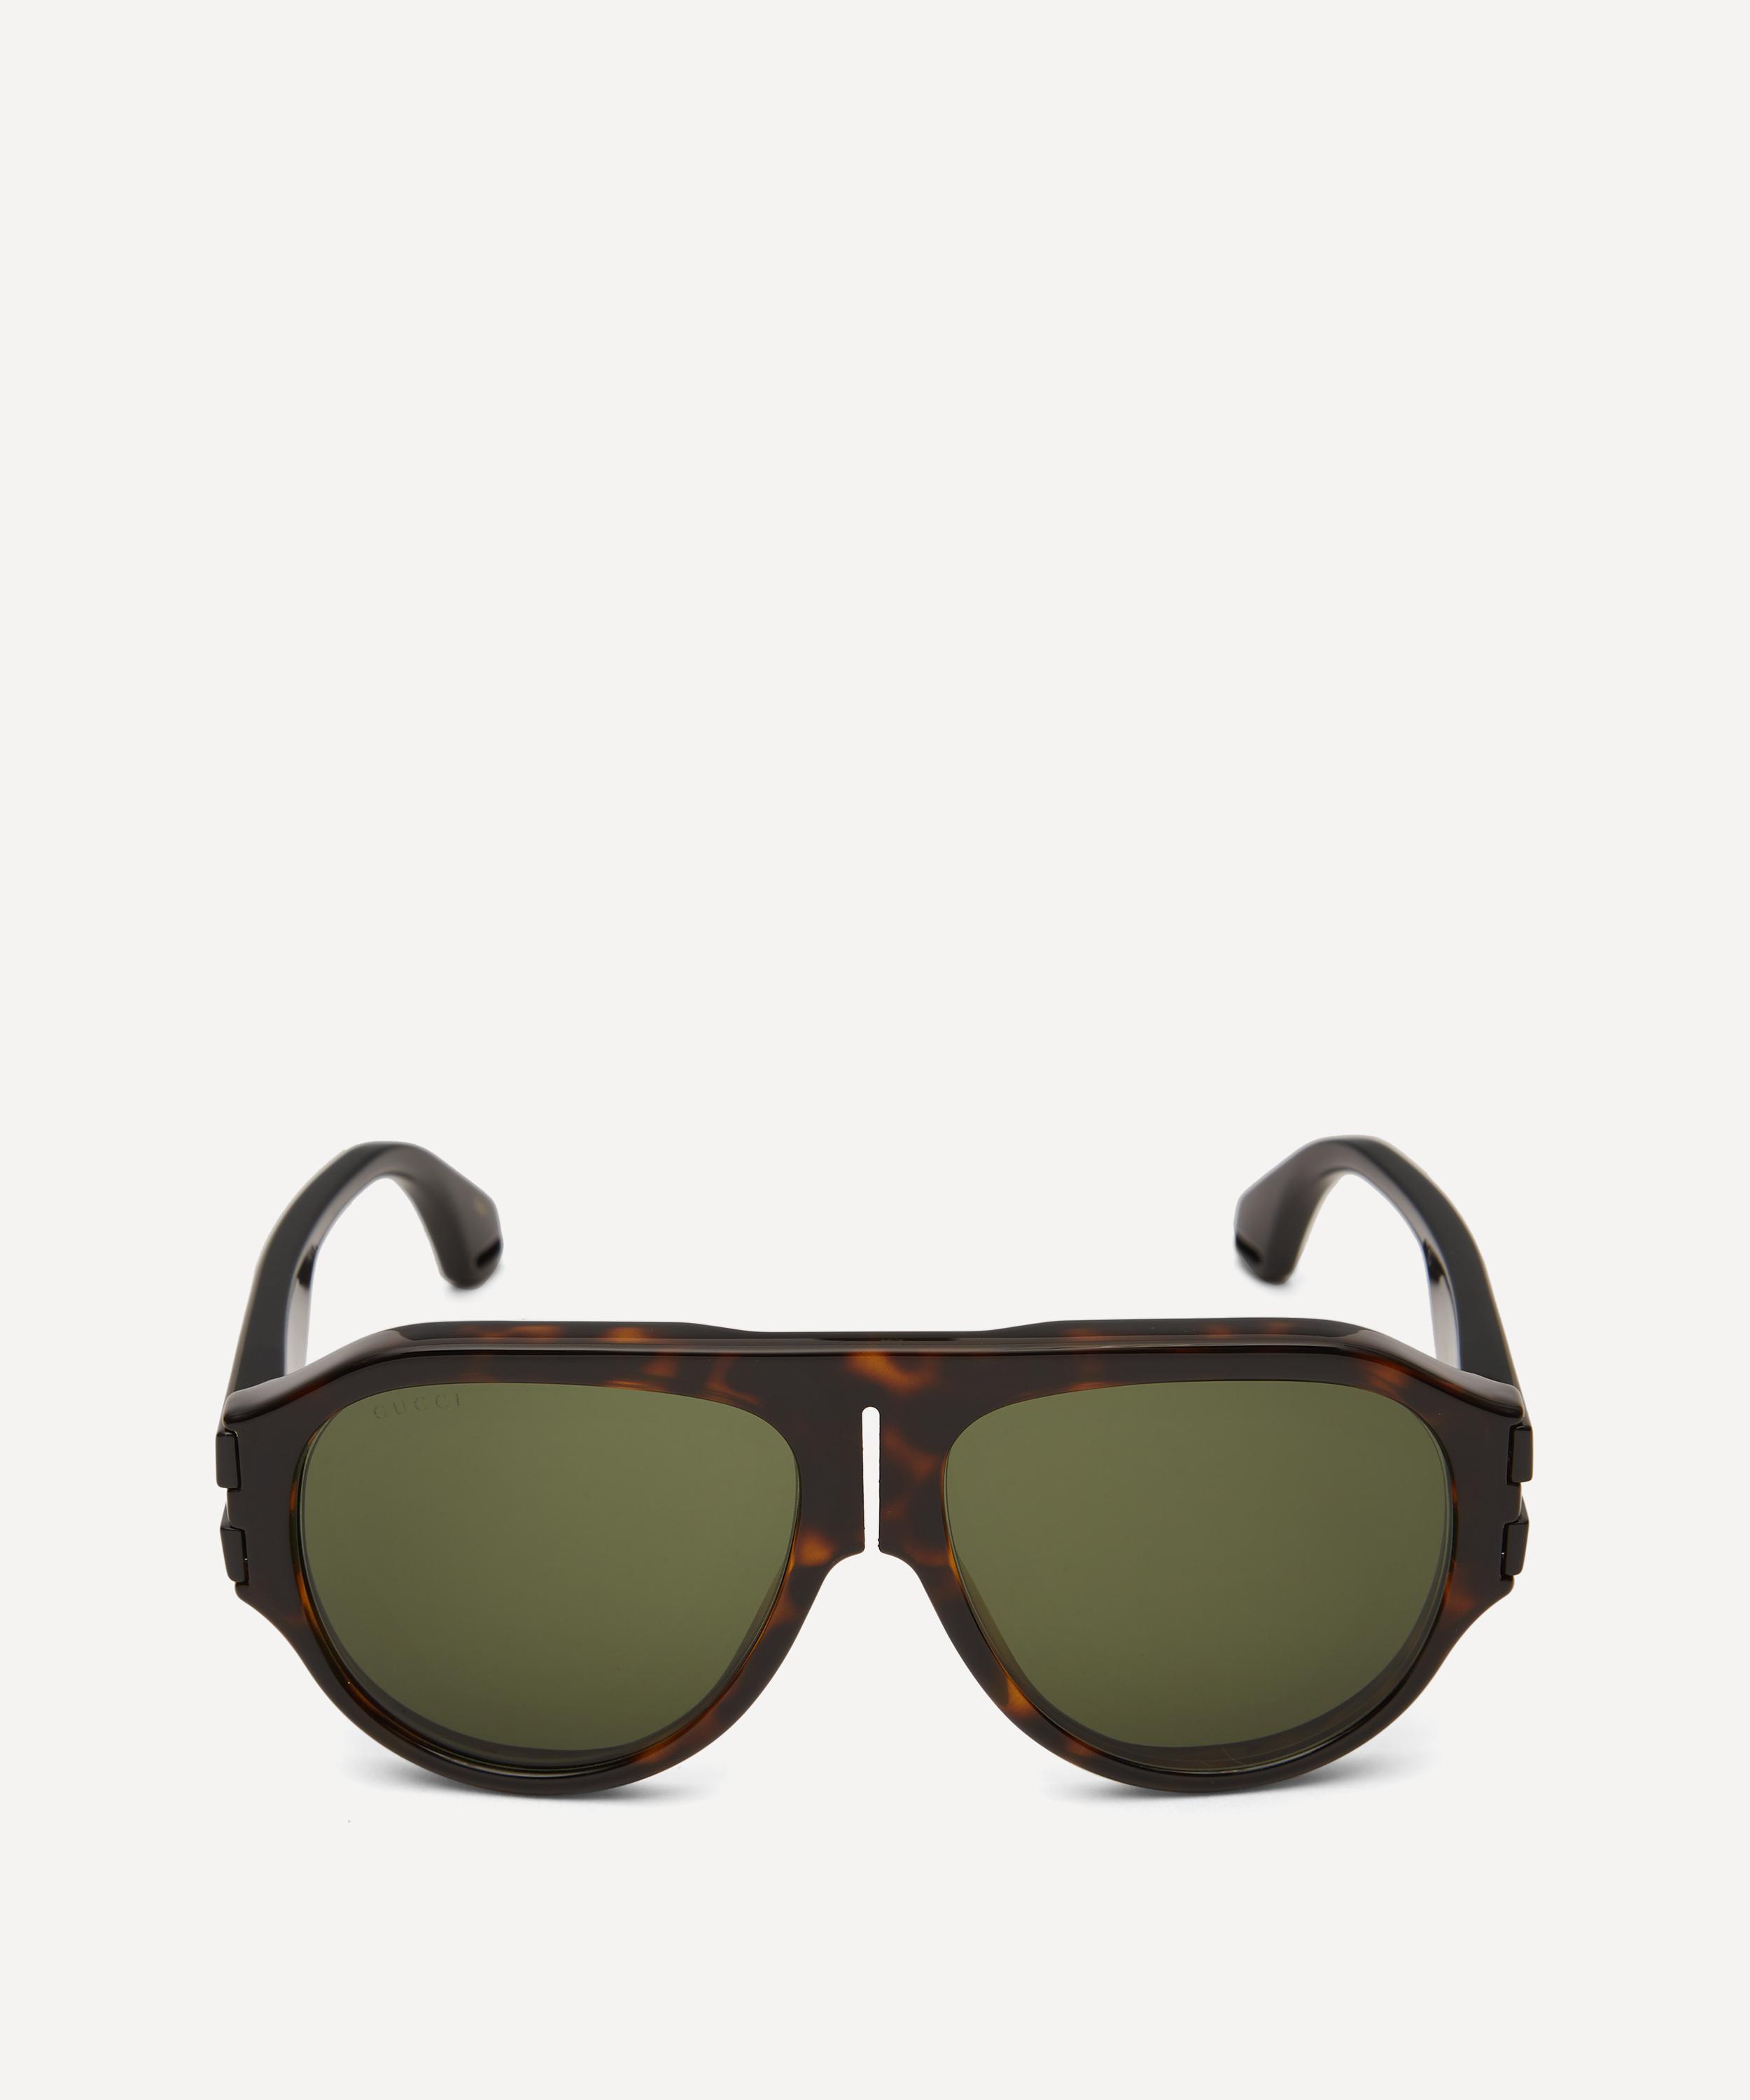 GUCCI FLAT-TOP INJECTED ACETATE SUNGLASSES,000697868